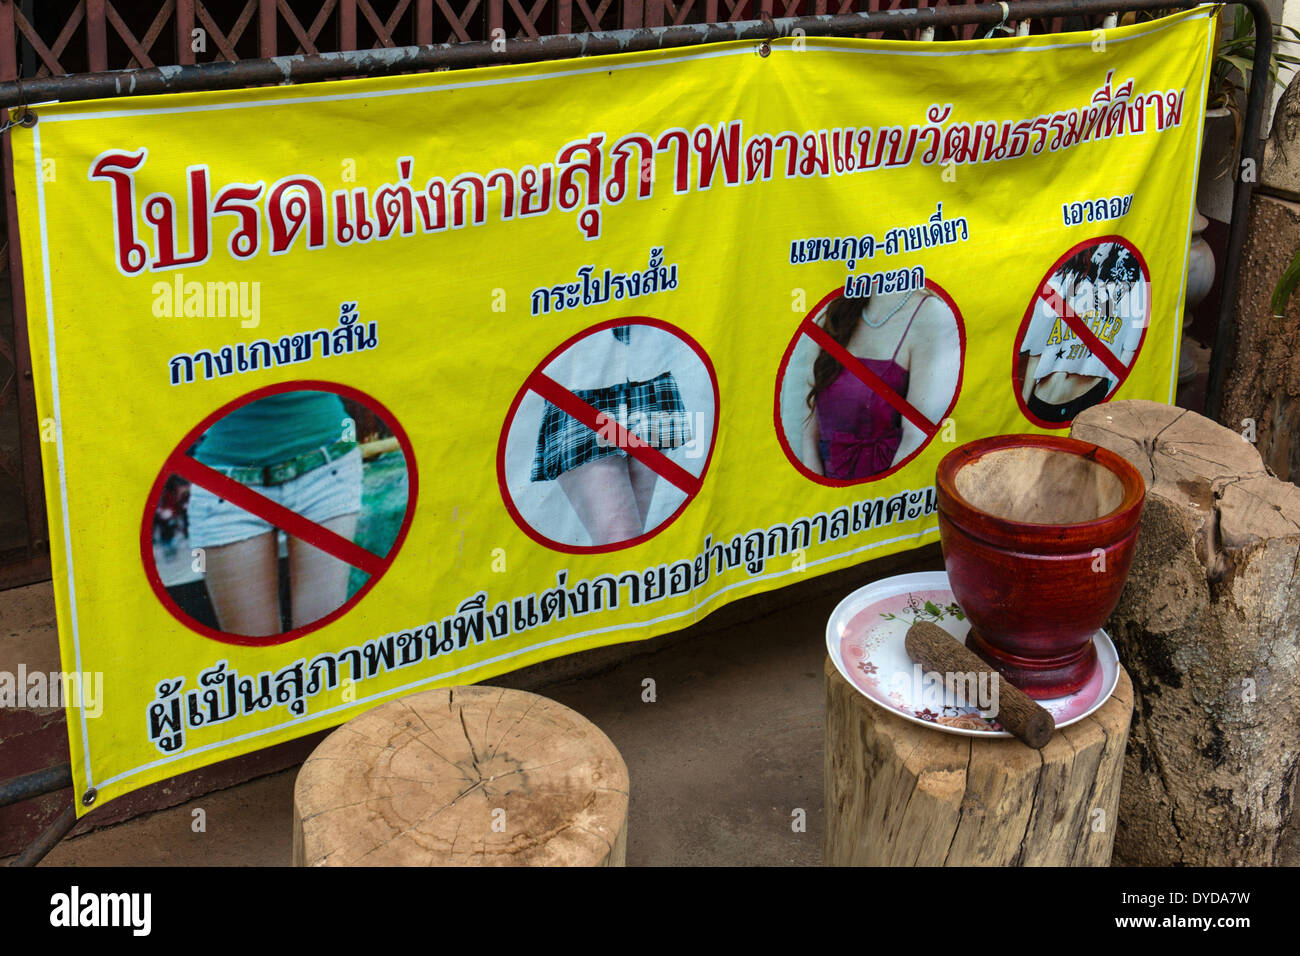 Informative banner banning the wearing of light clothing in a temple, Chiang Rai, Chiang Rai province, Northern Thailand Stock Photo